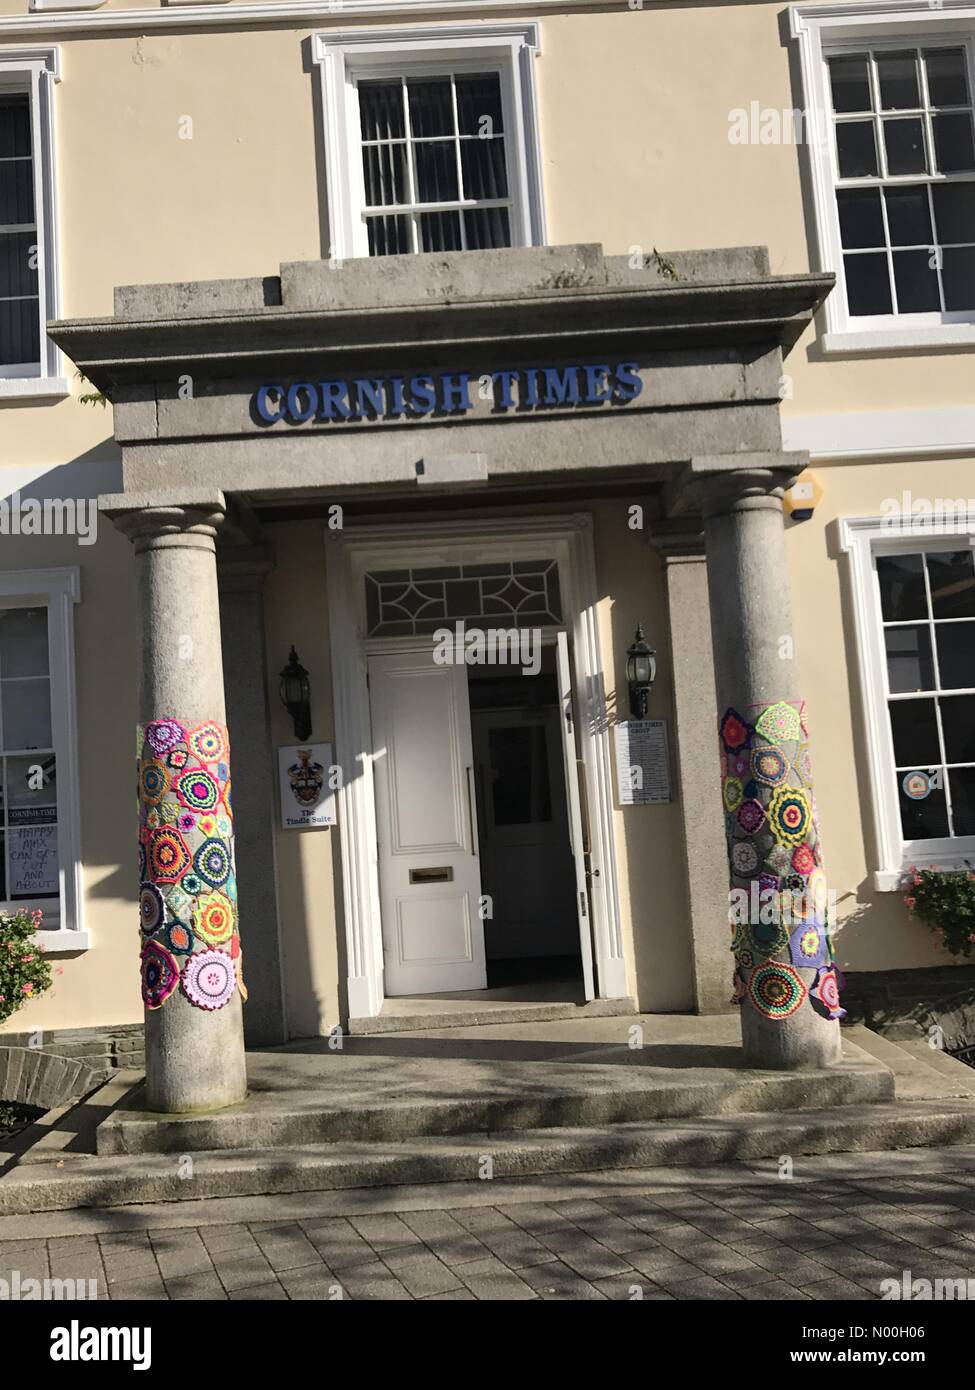 Liskeard, UK. 25th Sep, 2017. Cornish Times Liskeard Cornwall September 2017 adverting on its Pillars adorned with crochet and knitting by local Liskeard residents for the occasion of a Special wool fair in the town held yearly. Credit: andiehudson/StockimoNews/Alamy Live News Stock Photo